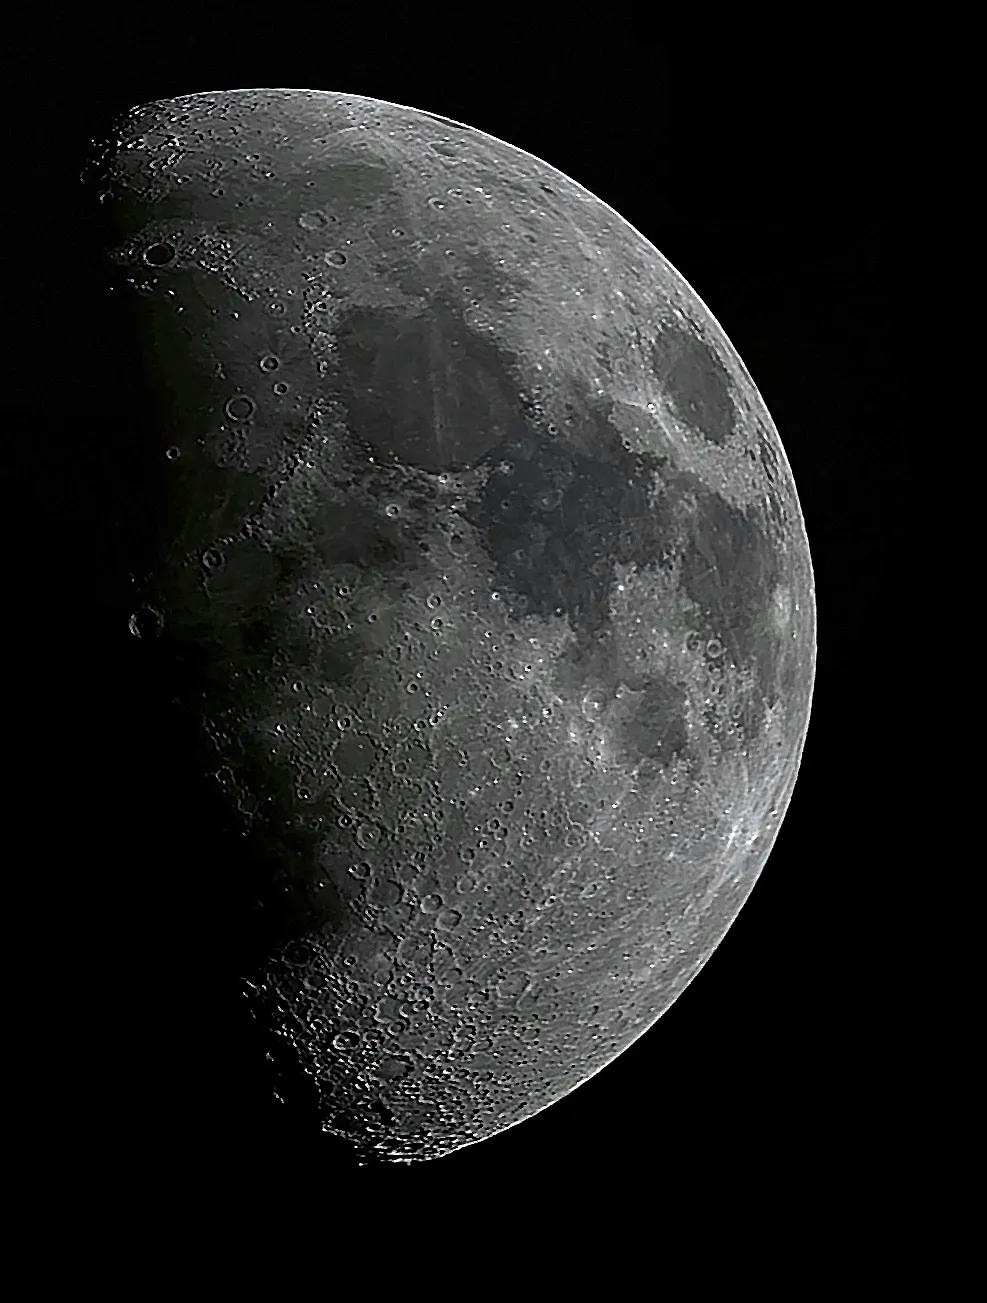 Moon by Michael Fennings, London, UK. Equipment: Celestron 130EQ/MD, Phillips SPC800(flashed to SPC9800).